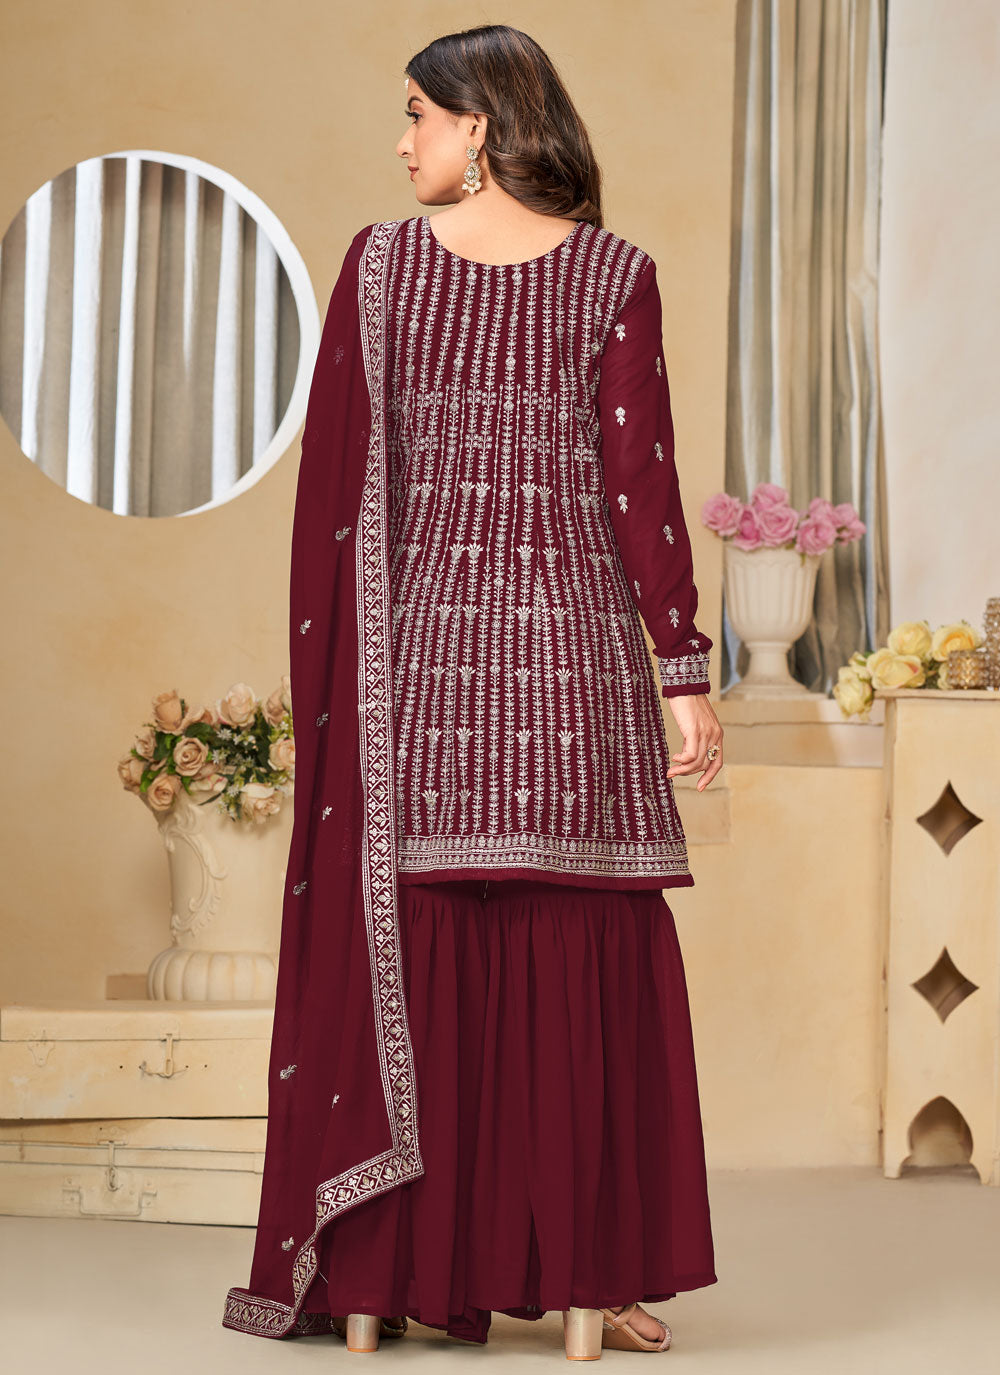 Maroon Faux Georgette Salwar Suit With Embroidered Work For Women